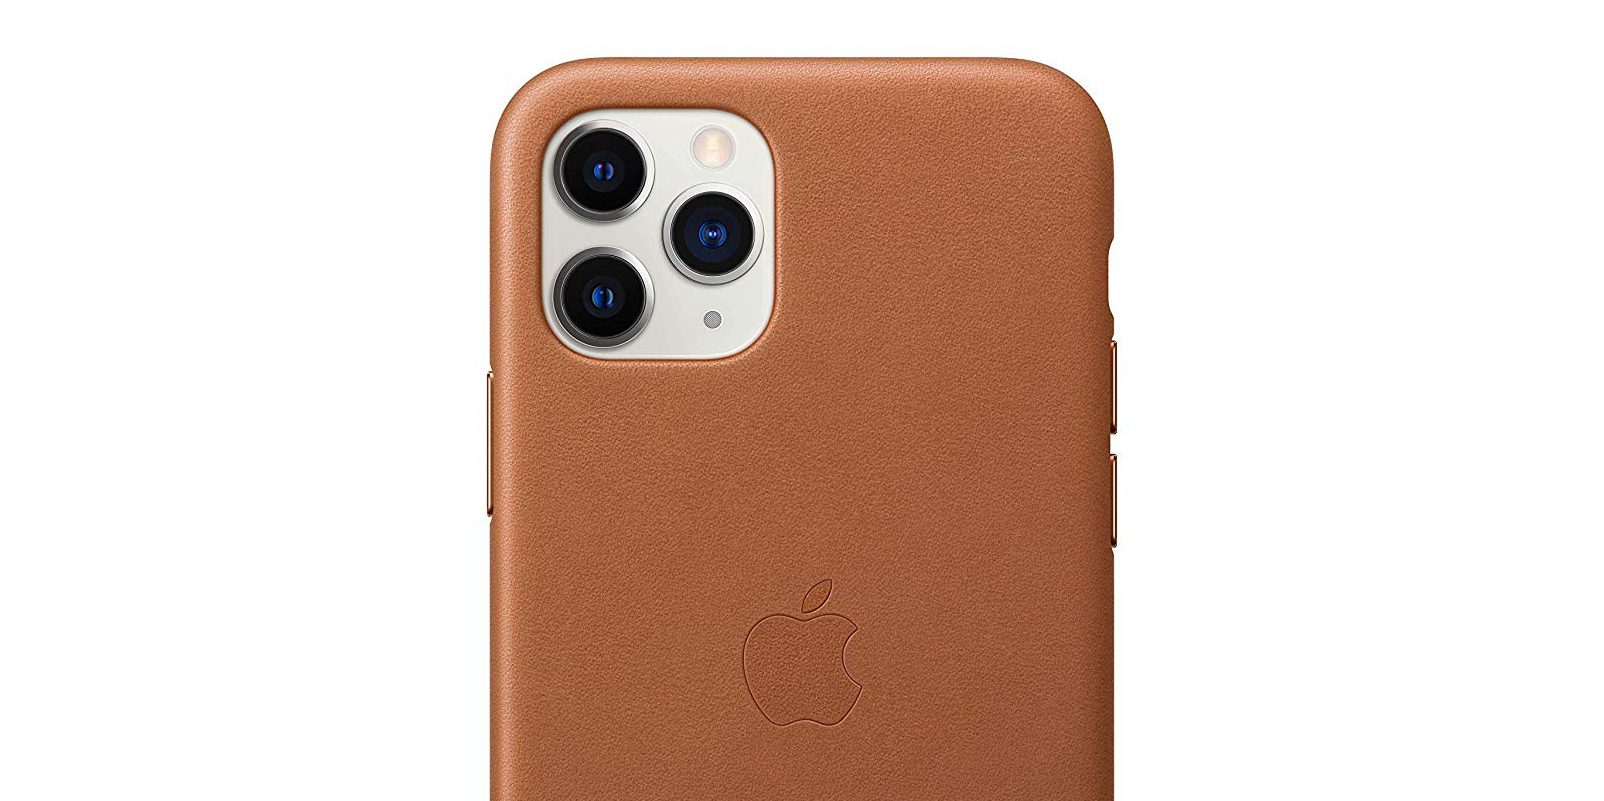 sale for cases iphone 11 leather 11 8 deals plus Pro sale, cases iPhone iPhone on